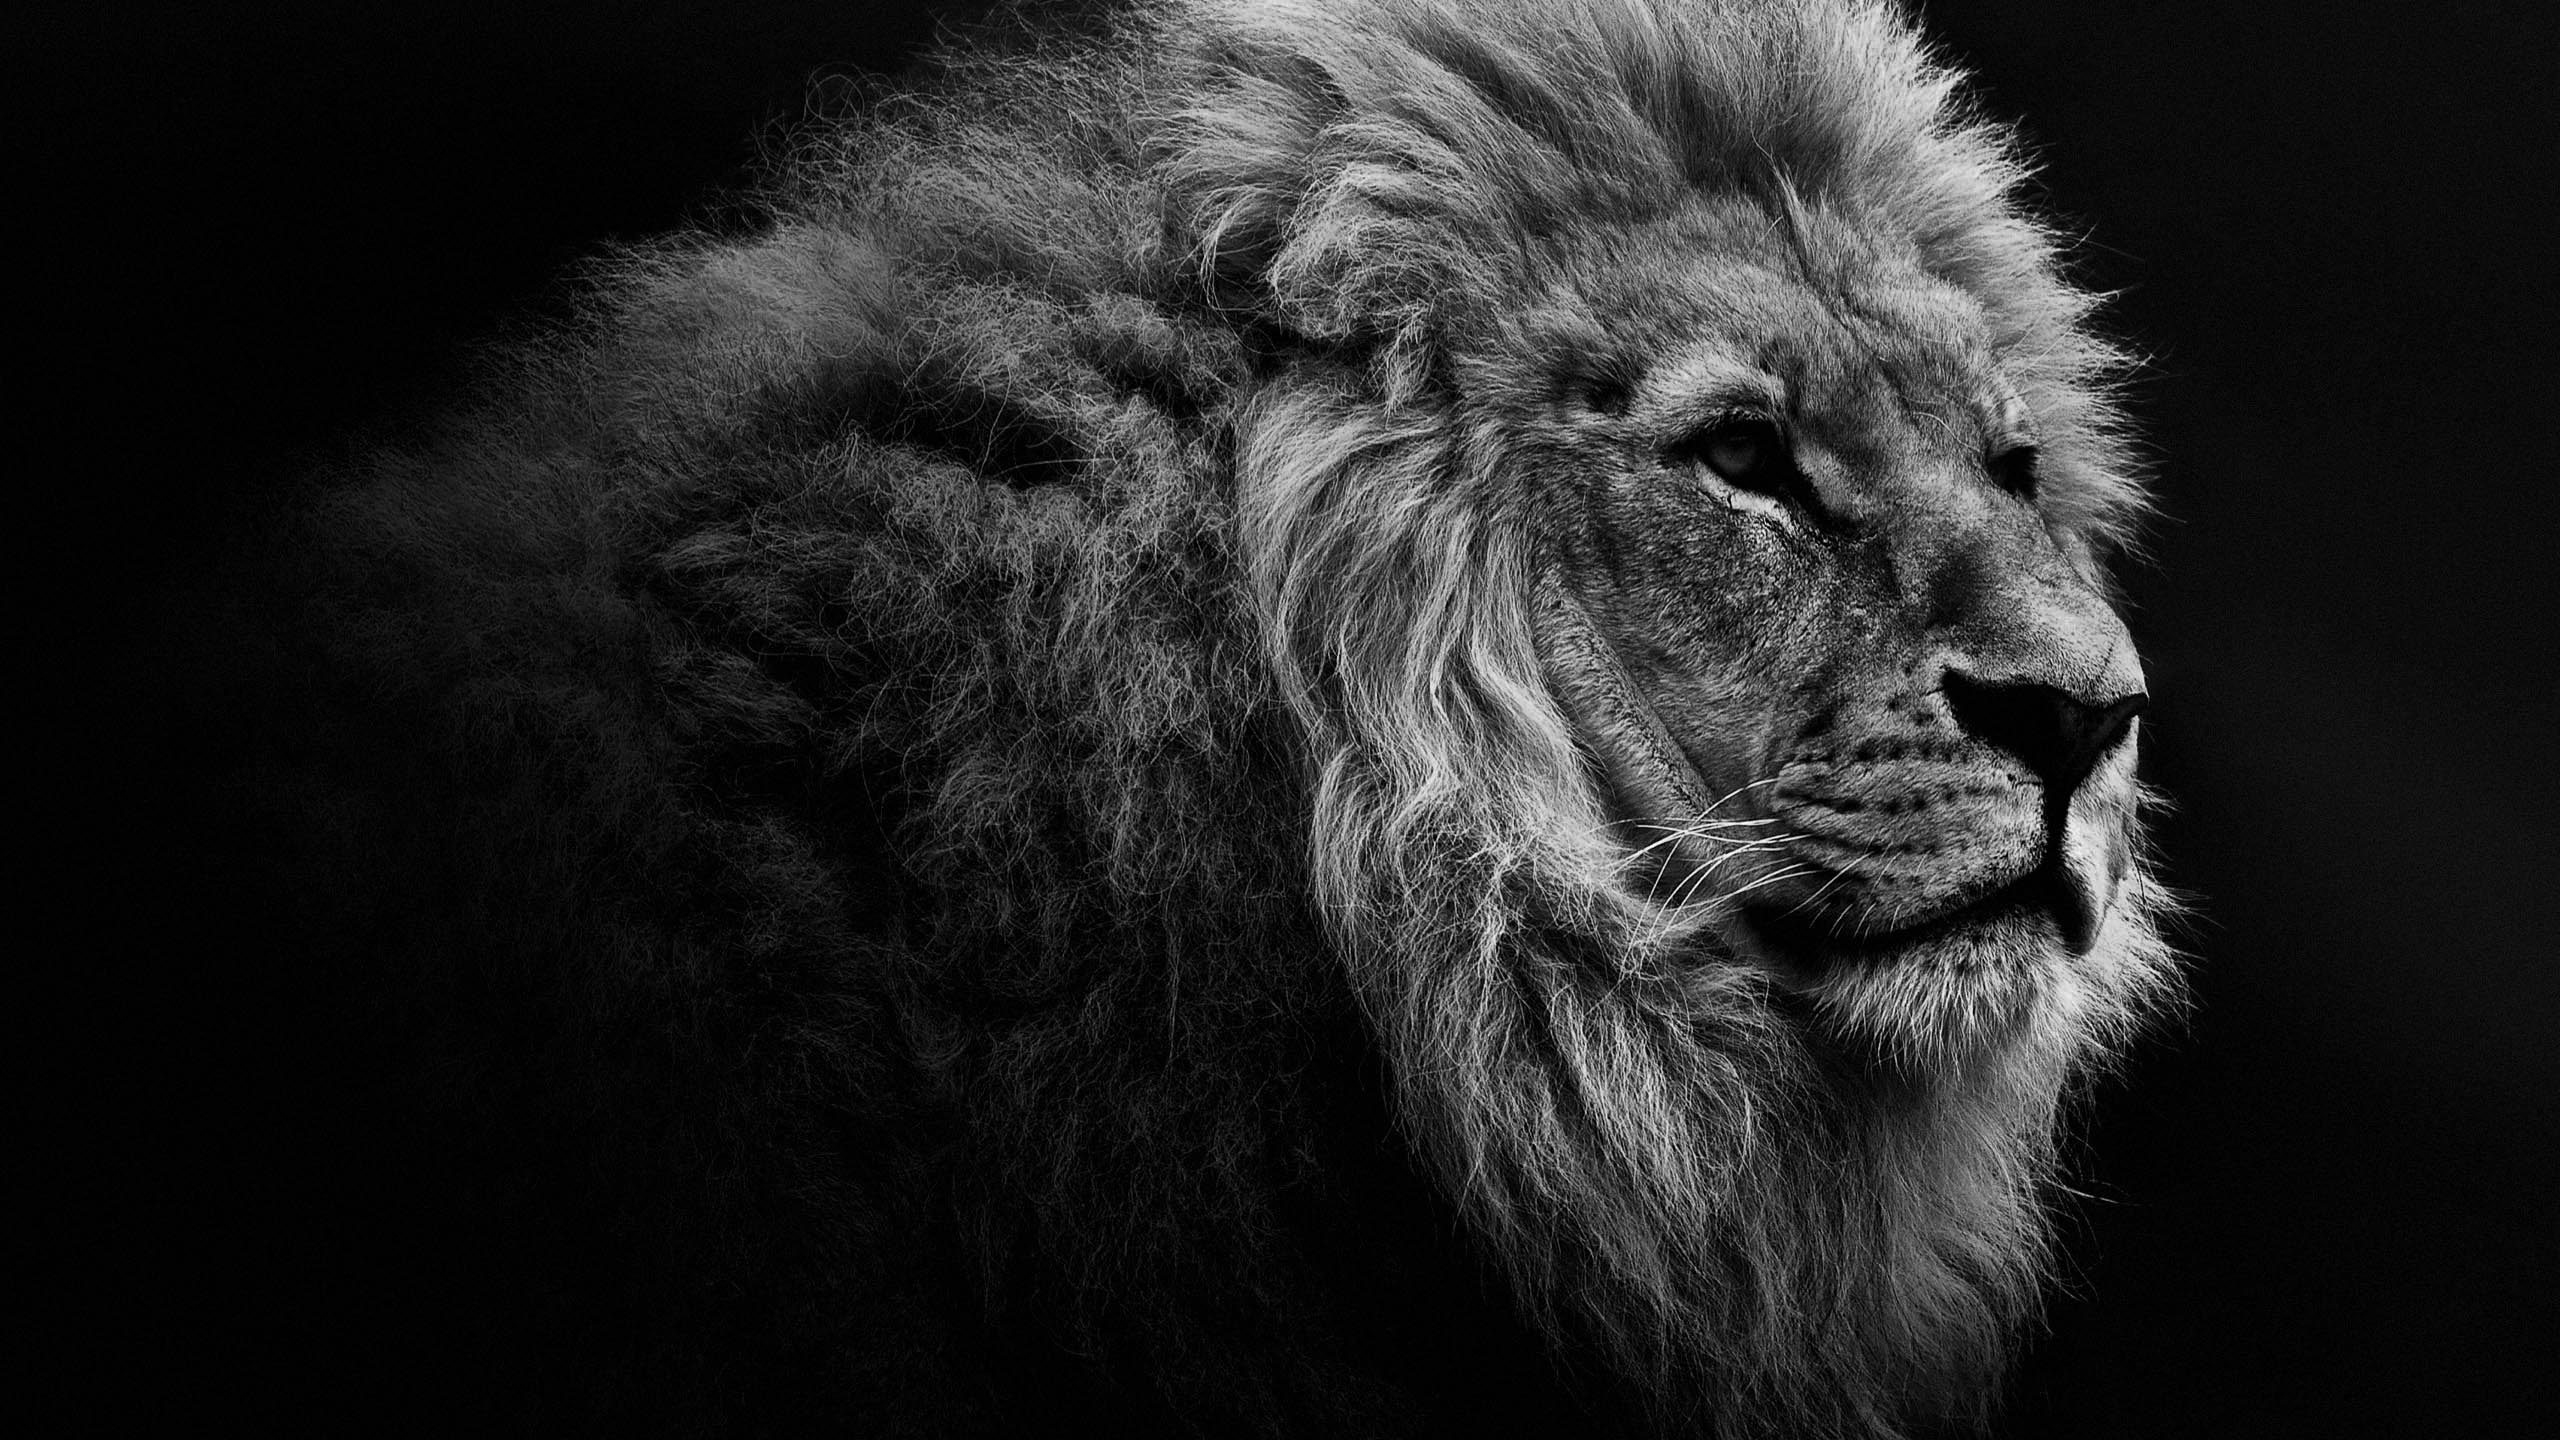 Wallpapers Animals  Wallpapers Felines  Lions Leo by silent  Hebuscom